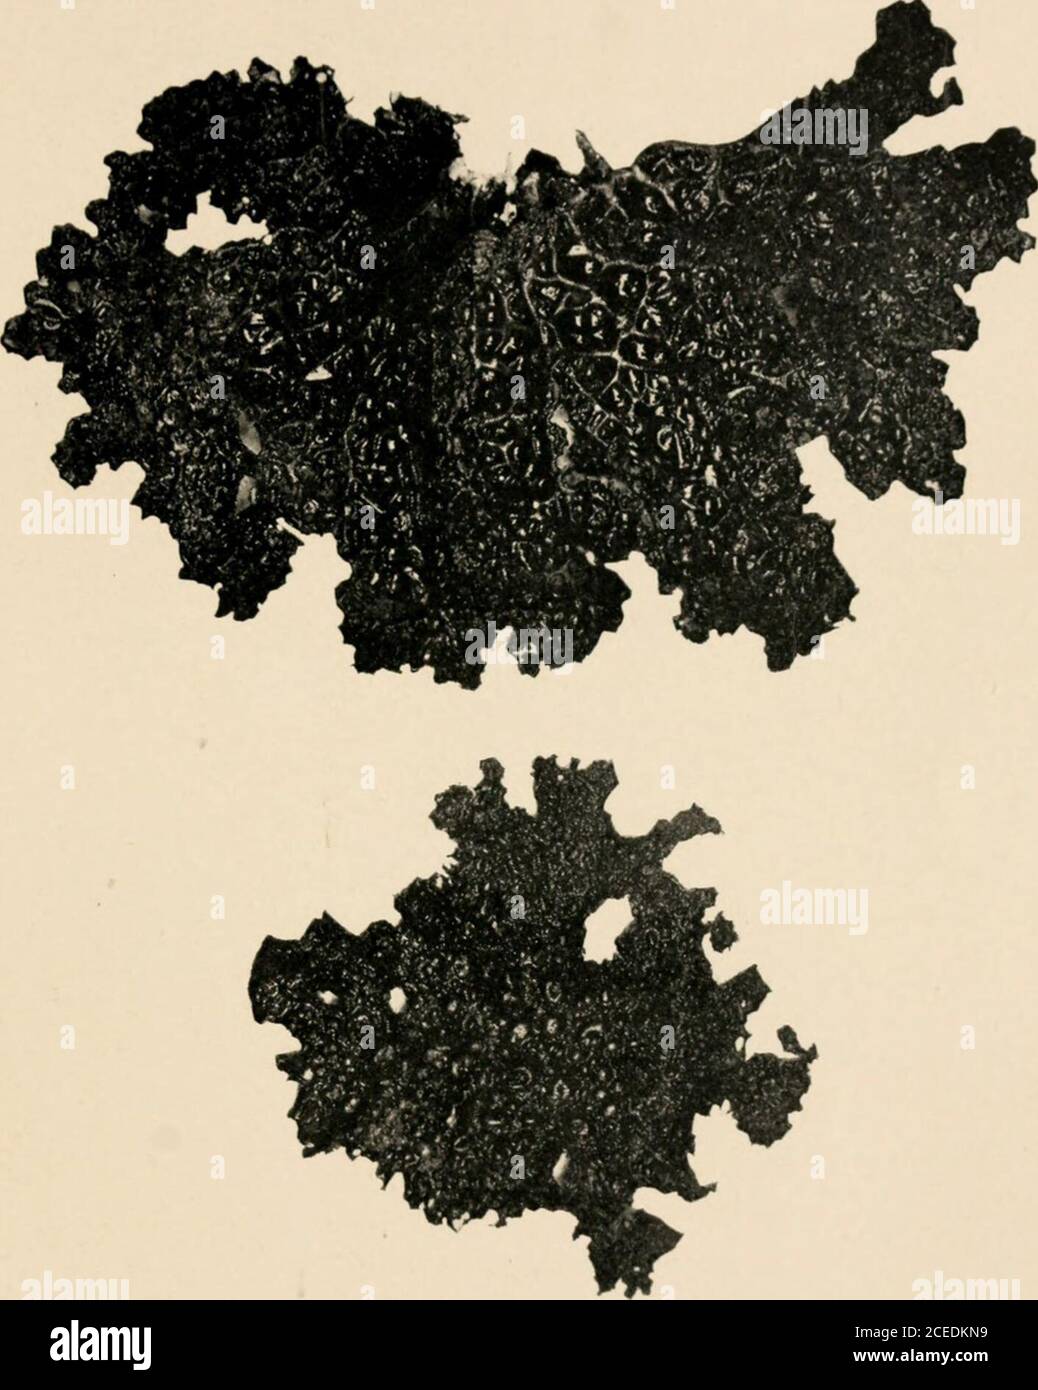 . A guide to the study of lichens. less distinctively southern in theirrange. The change in algal symbiont may have en-abled the plants to thrive in a colder climate. Theyoccur upon rocks and trees. 1. Sticta amplissima. Thallus large, parmelioid,rather thin and papery, lobed, grayish-green andsmooth above; brown beneath, with rhizoids but nocyphellae. Apothecia rather large, numerous. Diskchestnut-brown. Spores colorless, long, slender, some-what curved, indistinctly septate, 46/x X 6/x. 2. Sticta pulmonaria. Thallus large, lobes long,upper surface divided into concave areas, ridges andmargin Stock Photo